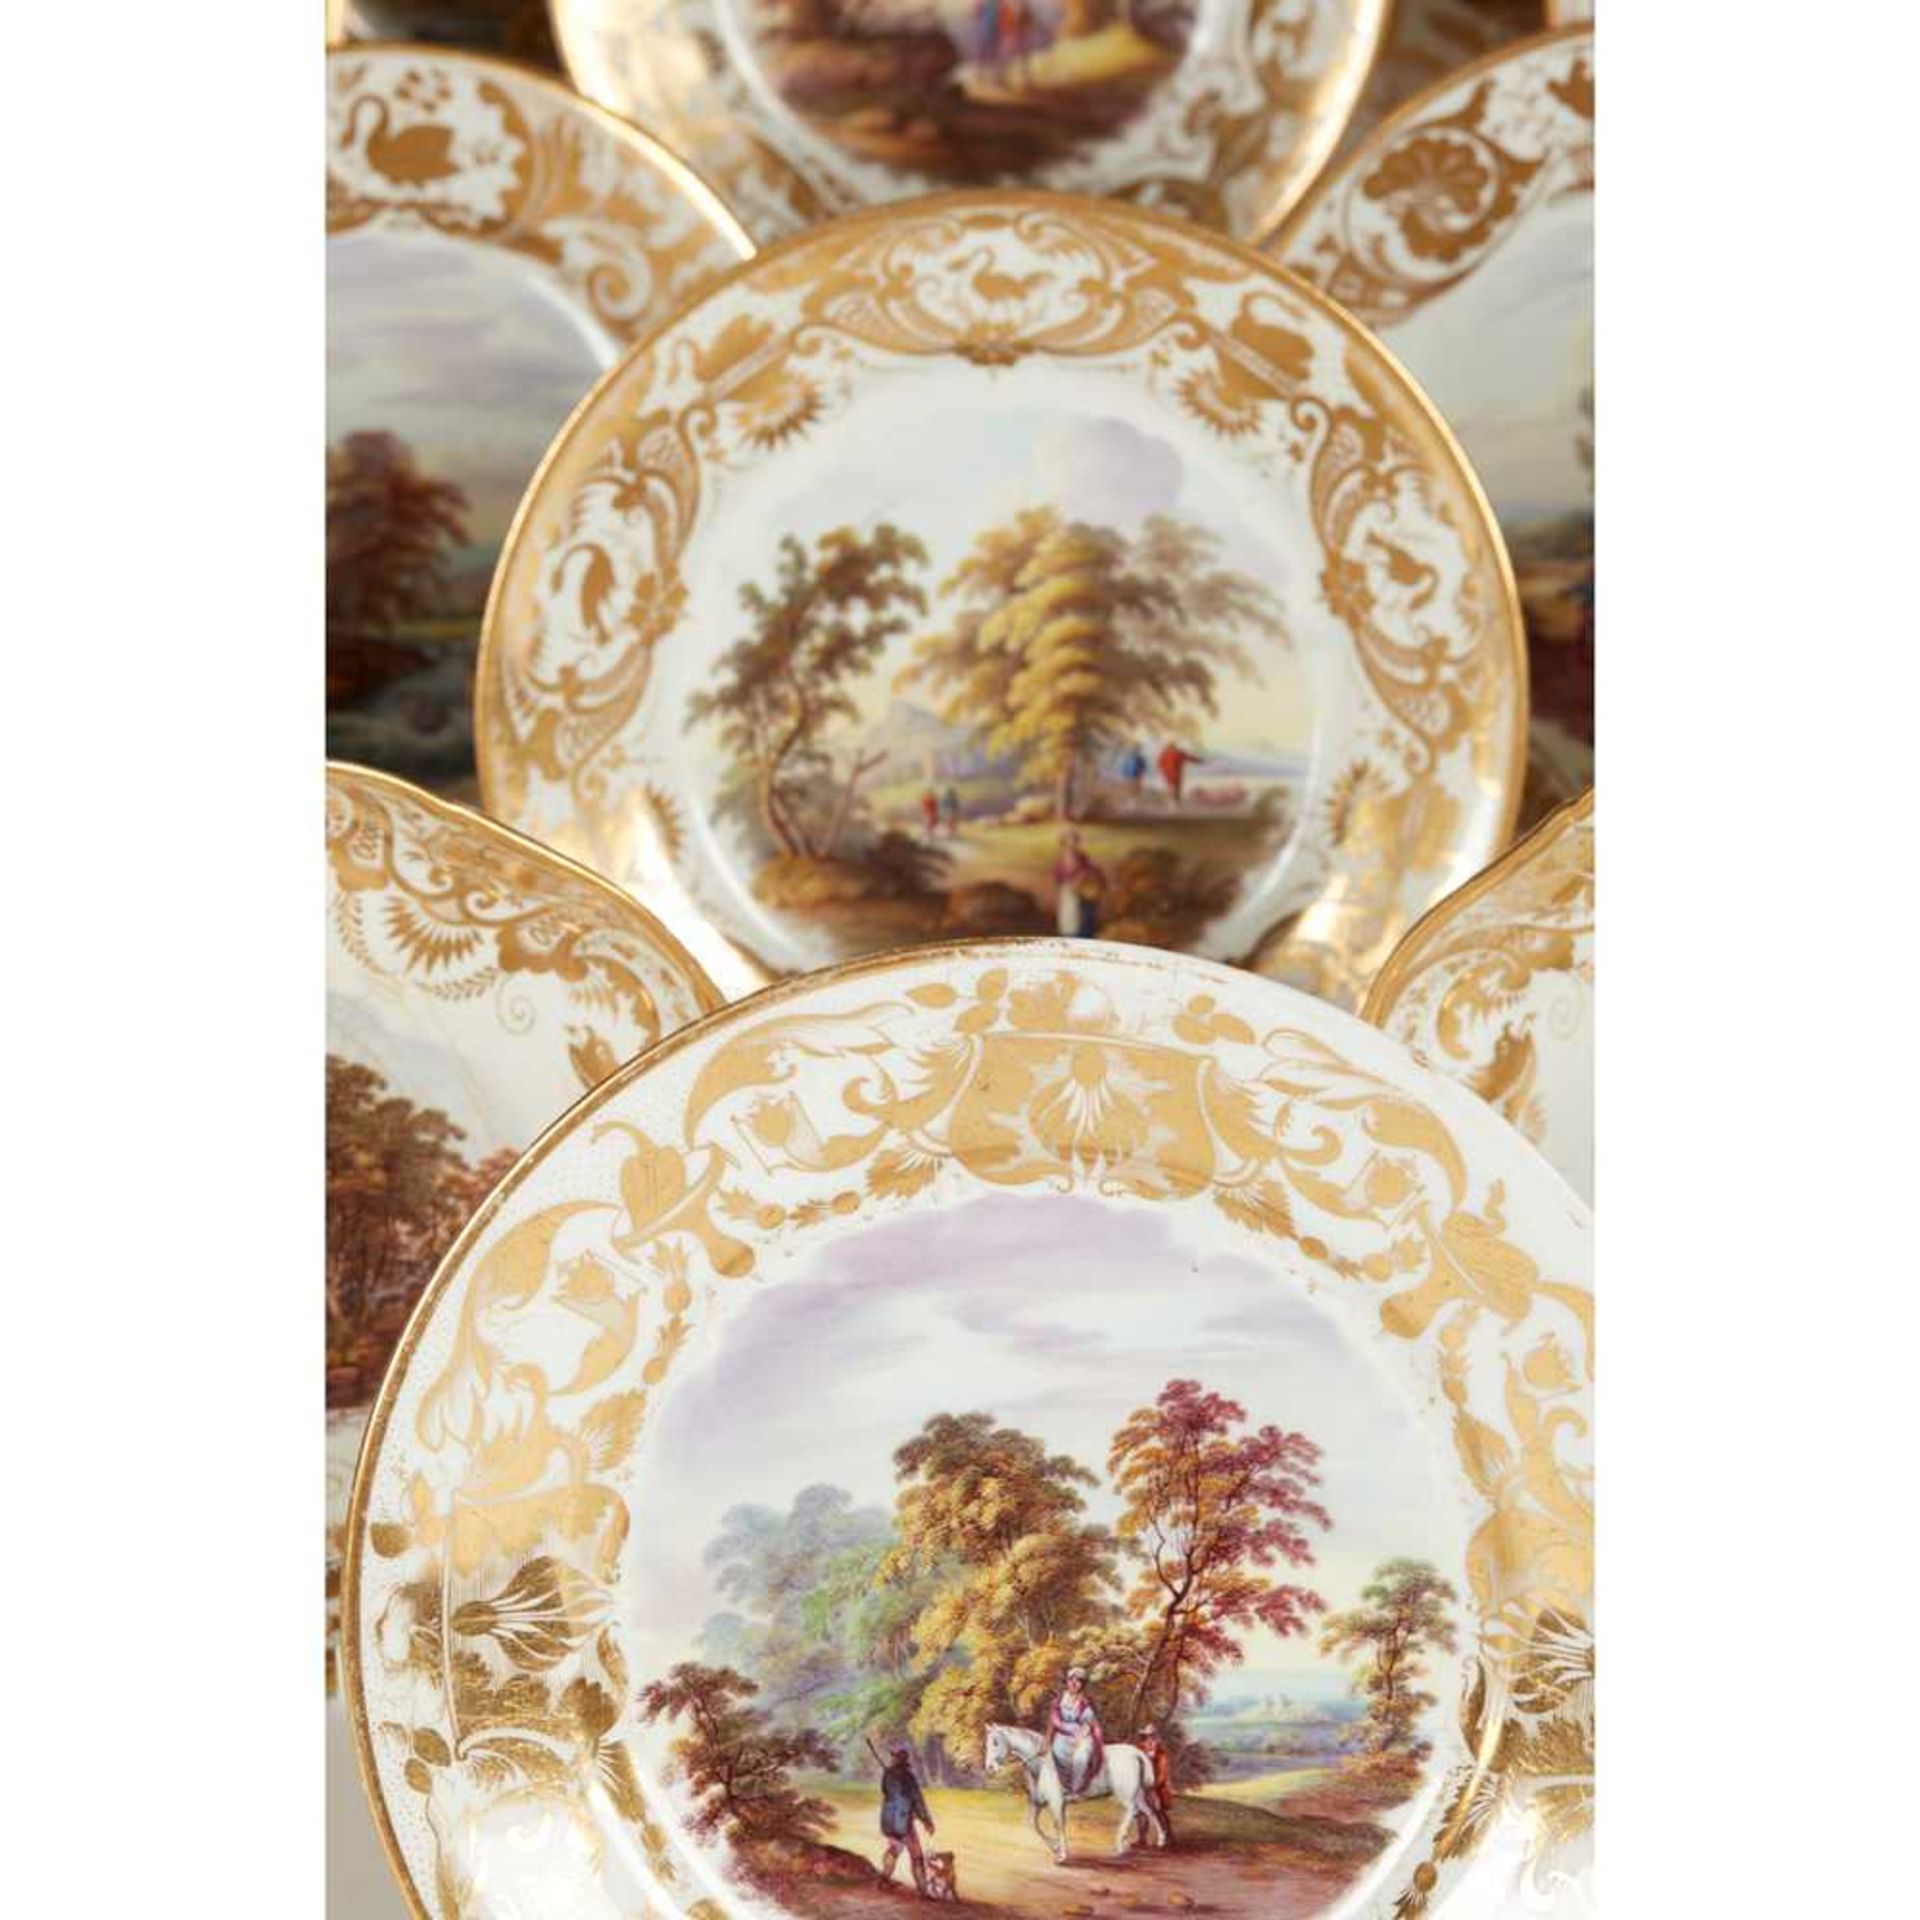 MATCHED DERBY PORCELAIN TOPOGRAPHICAL PART DESSERT SERVICE EARLY 19TH CENTURY - Image 4 of 8